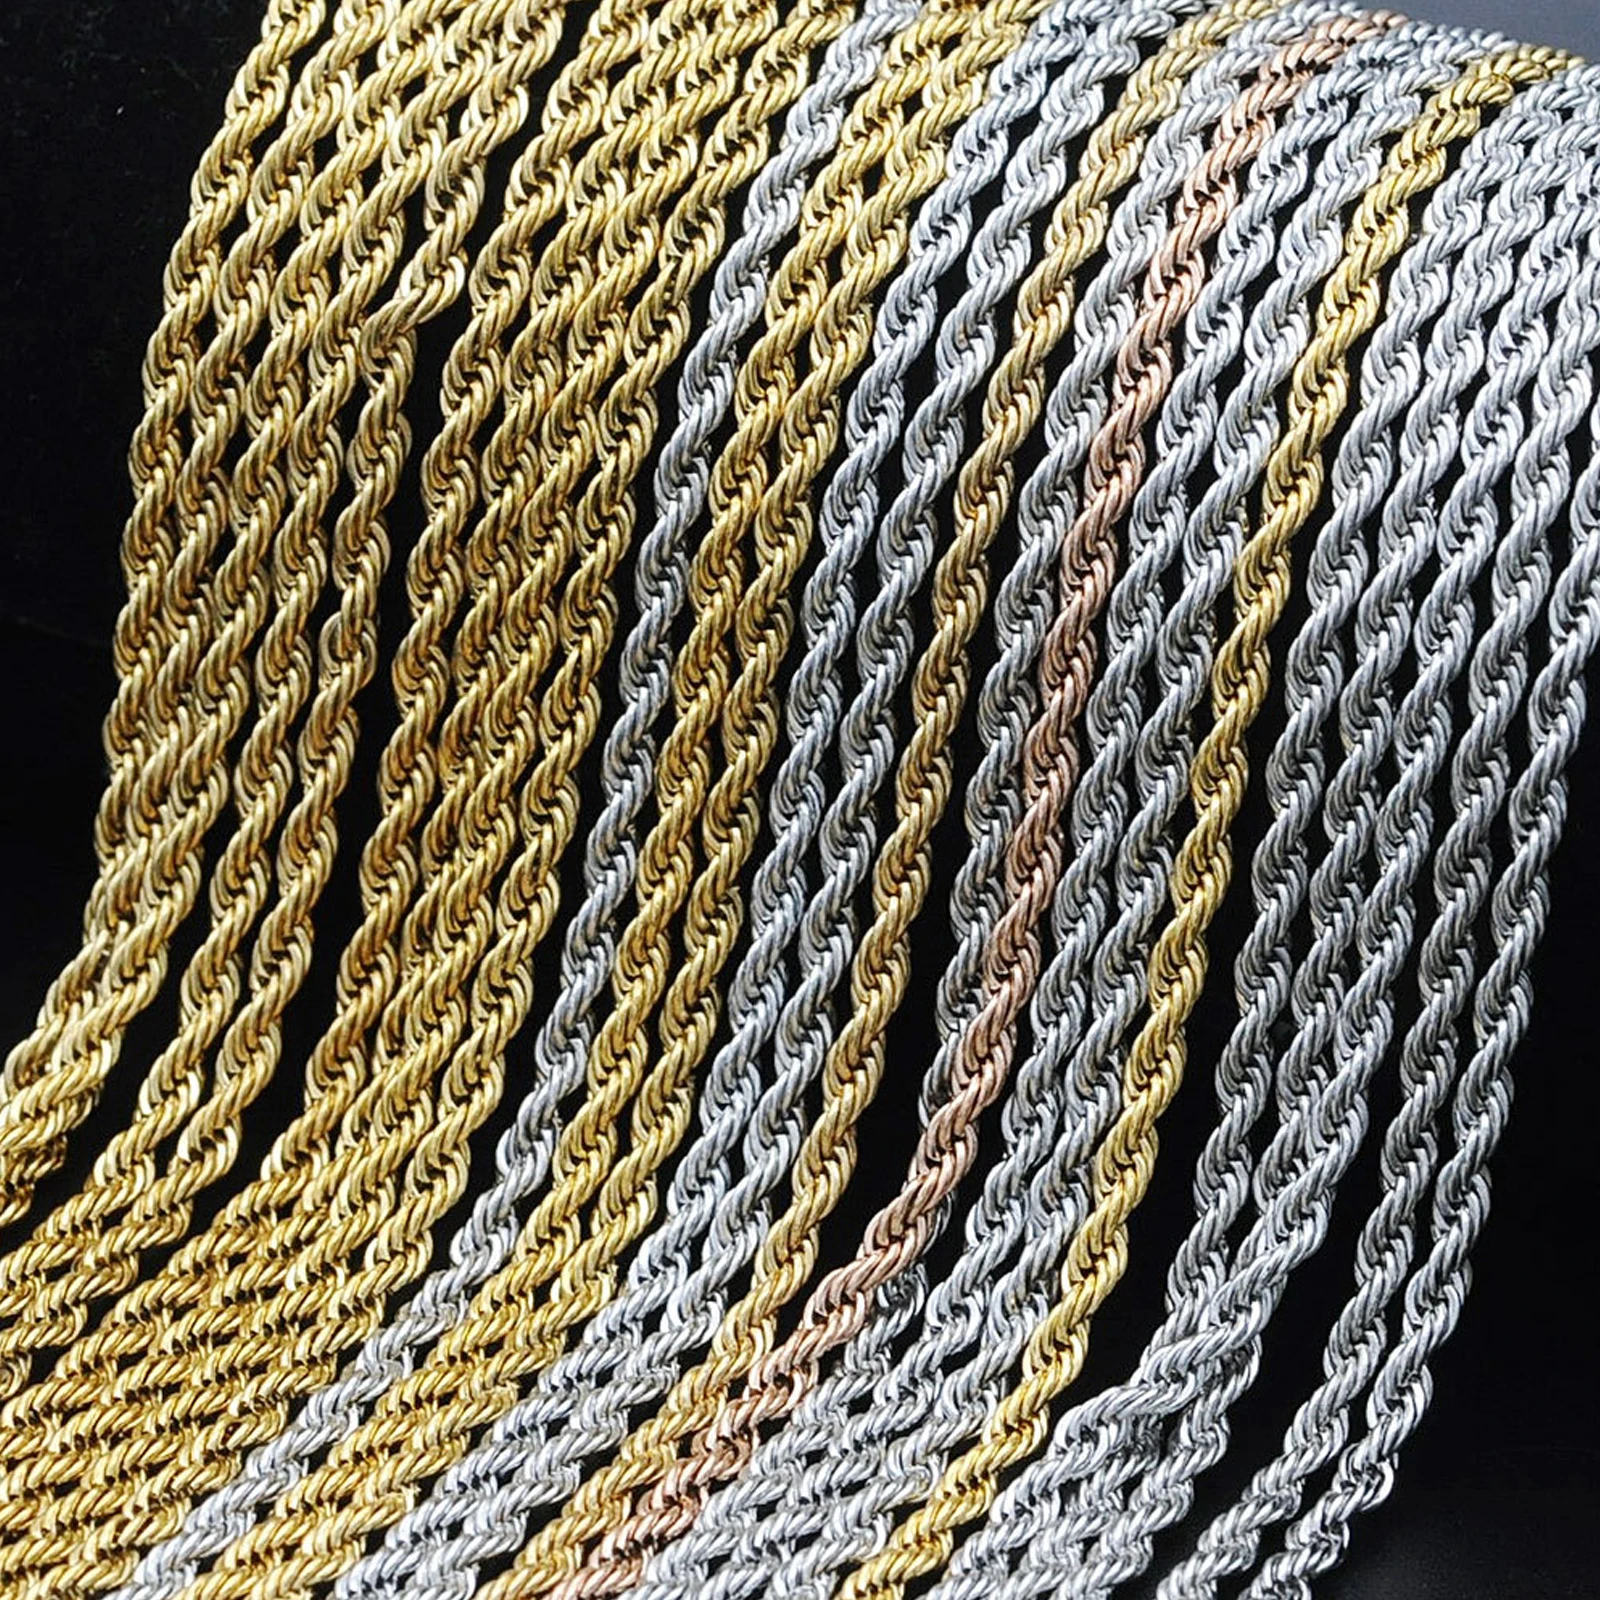 

Stainless Steel Braided Rope Chain Necklace For Men Women Gold/Silver Color Metal Choker Necklace Punk Style Jewelry Gifts,1PC